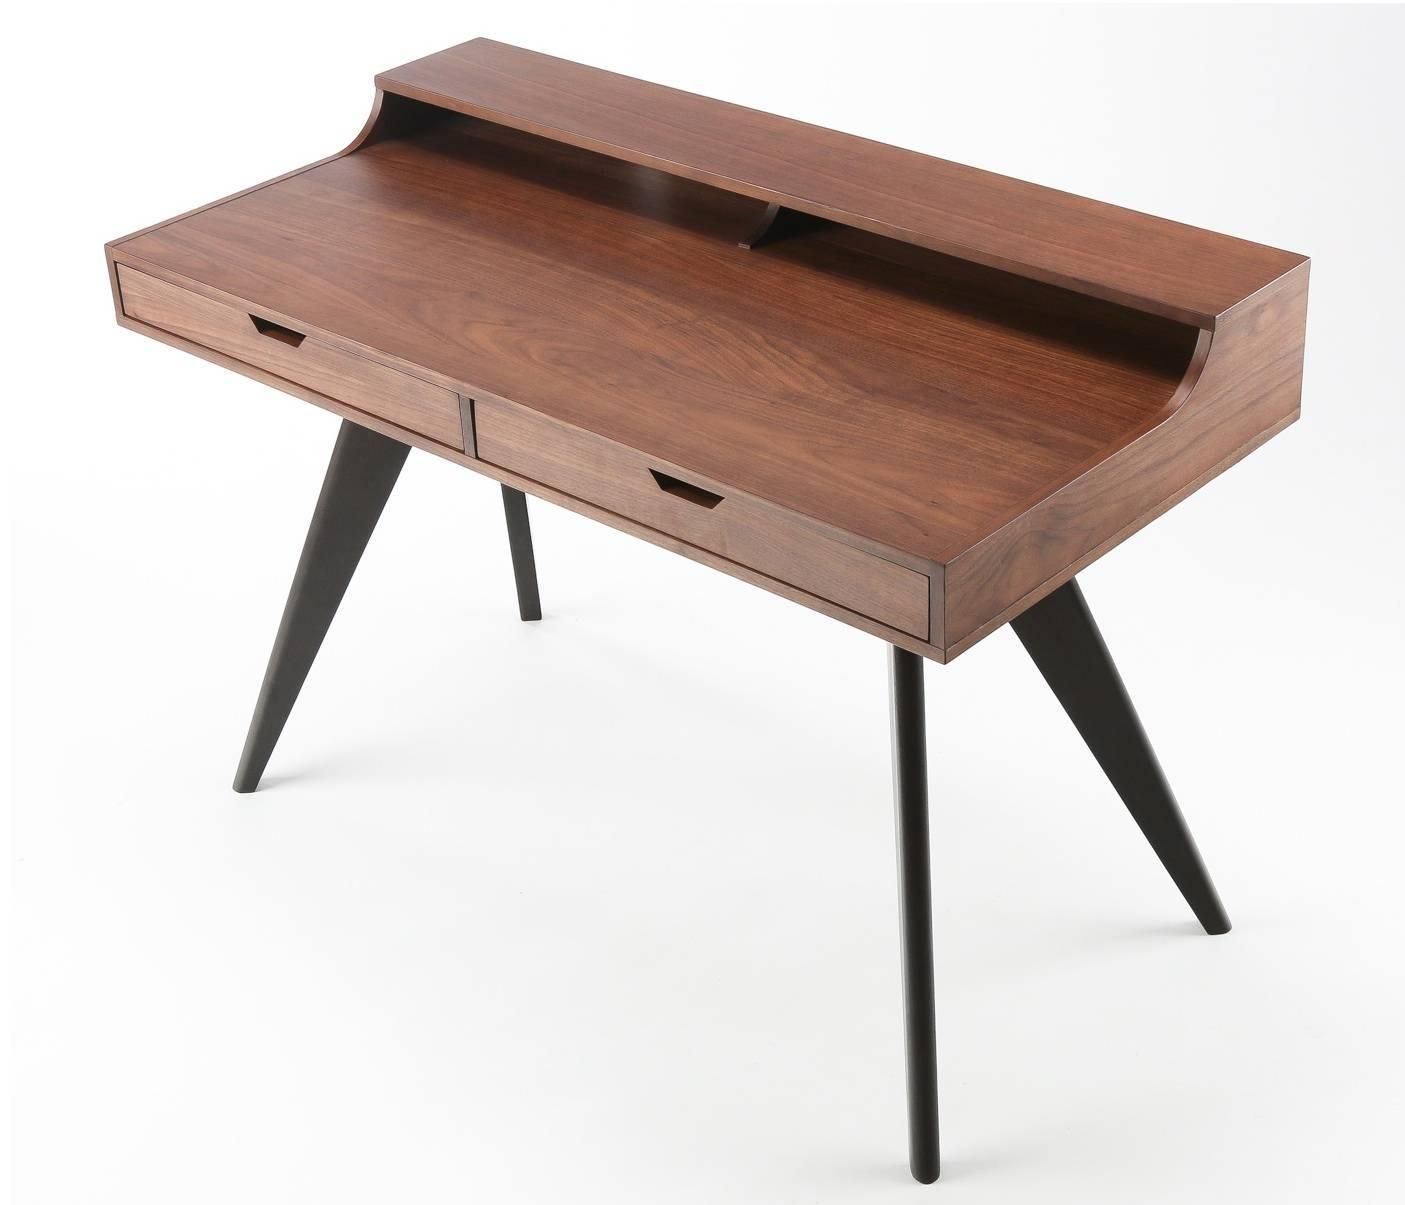 Contemporary Walnut And Wenge Veneer Writing Desk With Two Drawers At Throughout Glass And Walnut Modern Writing Desks (View 5 of 15)